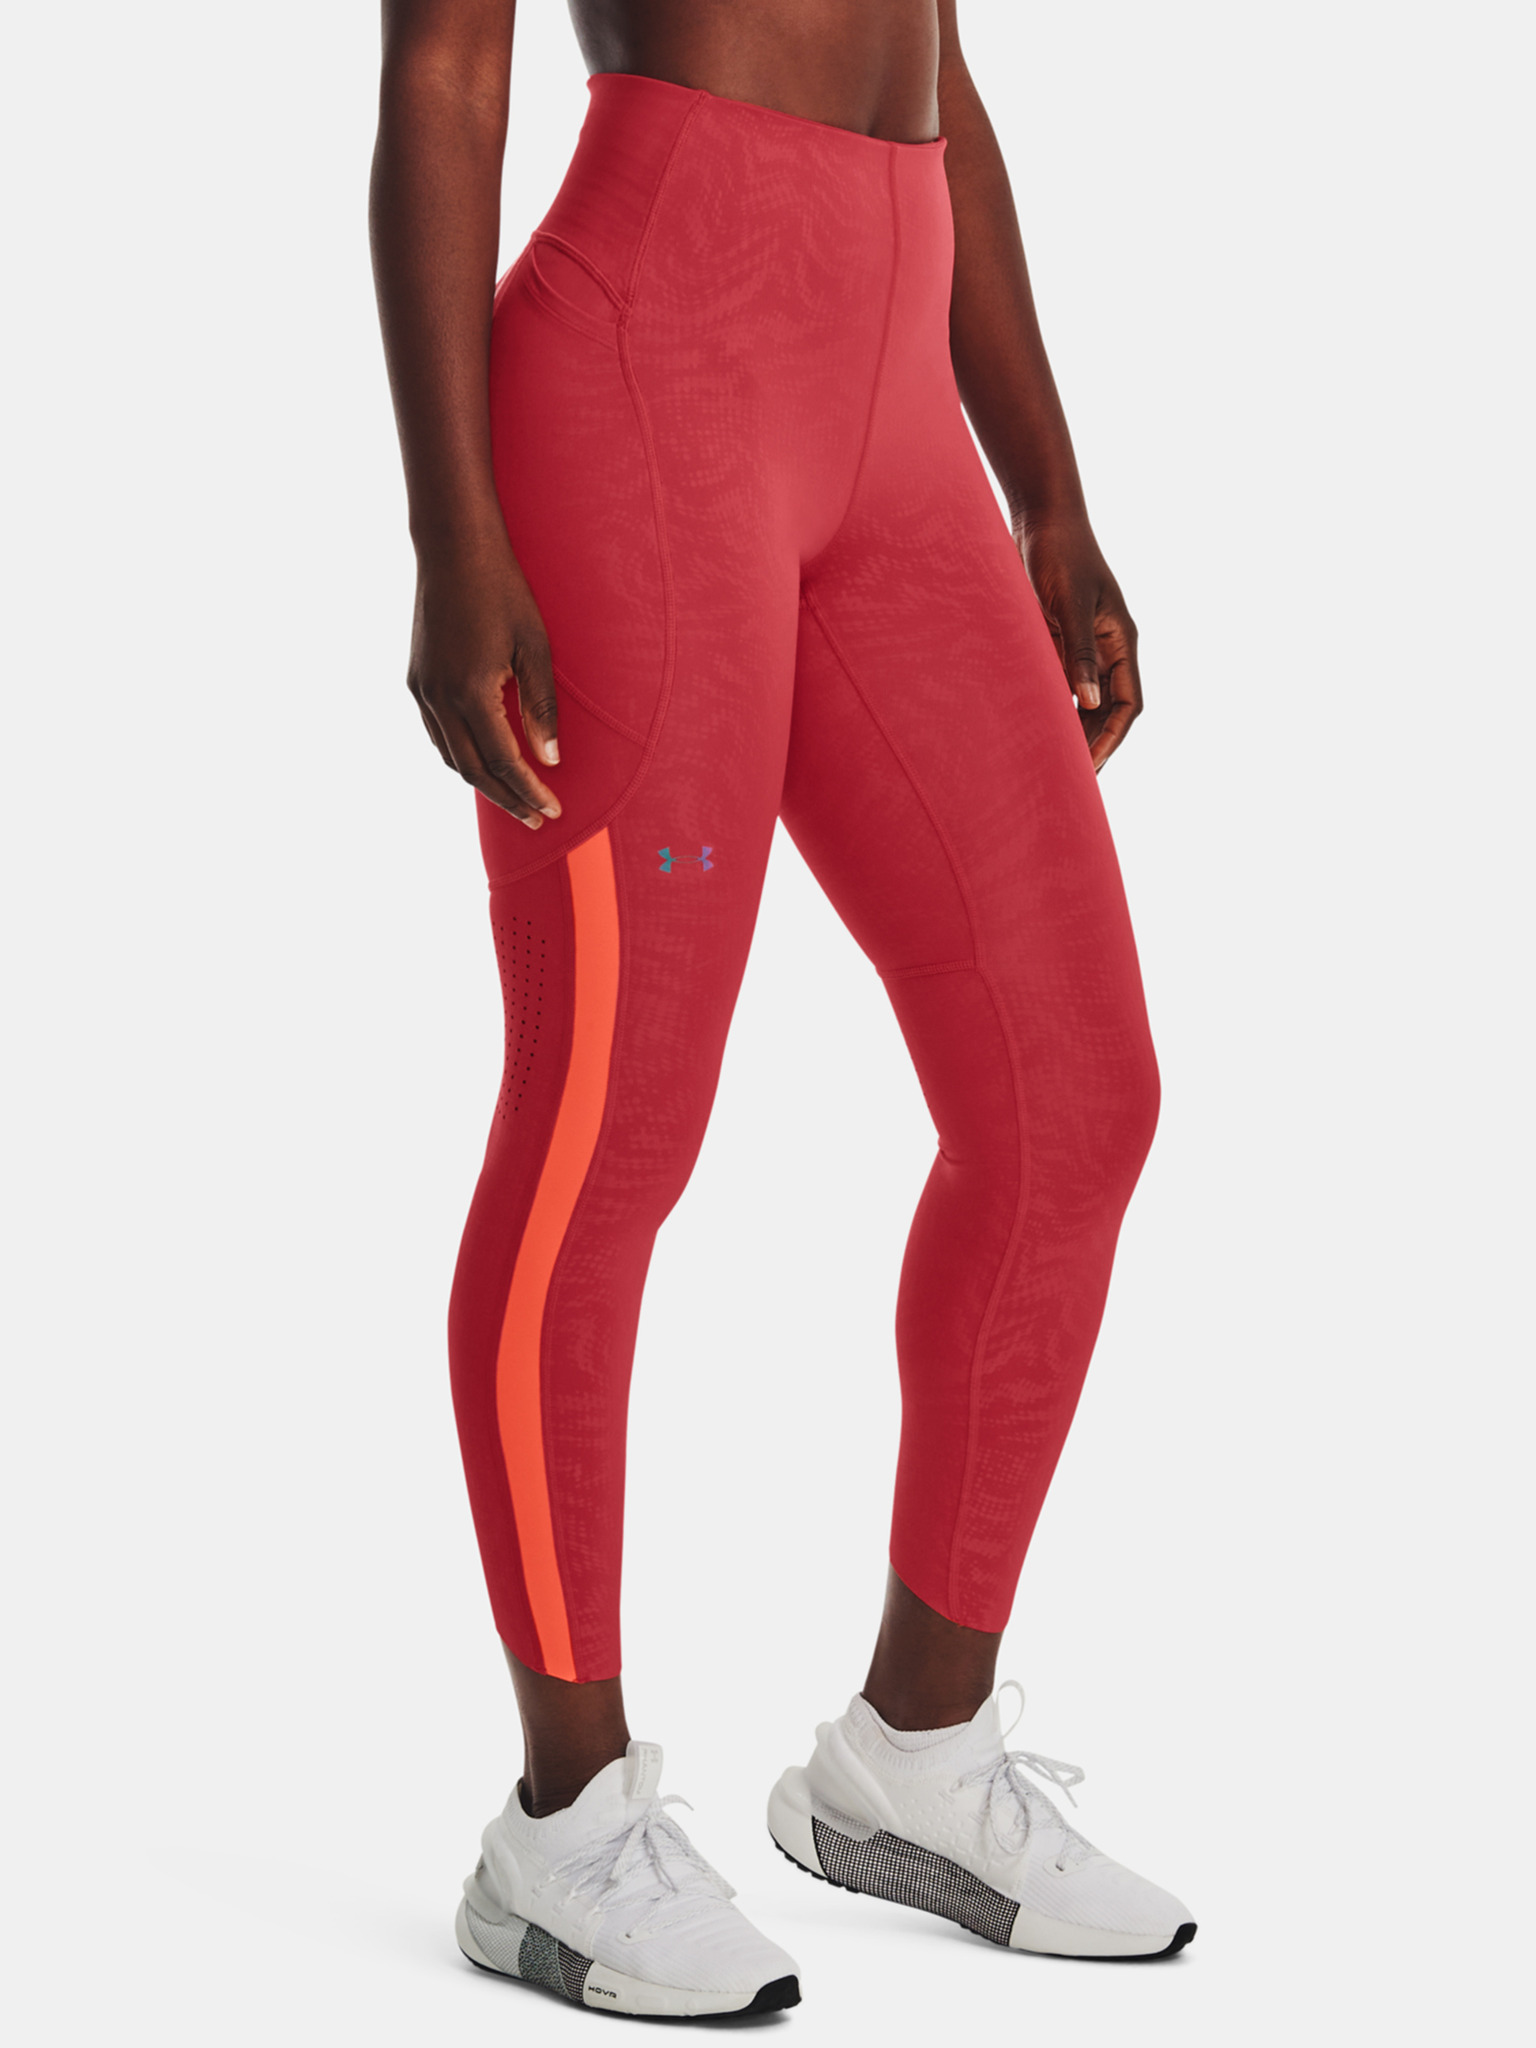 Under Armour Women's UA Fly-By Leggings  Pants for women, Legging, Under  armour women